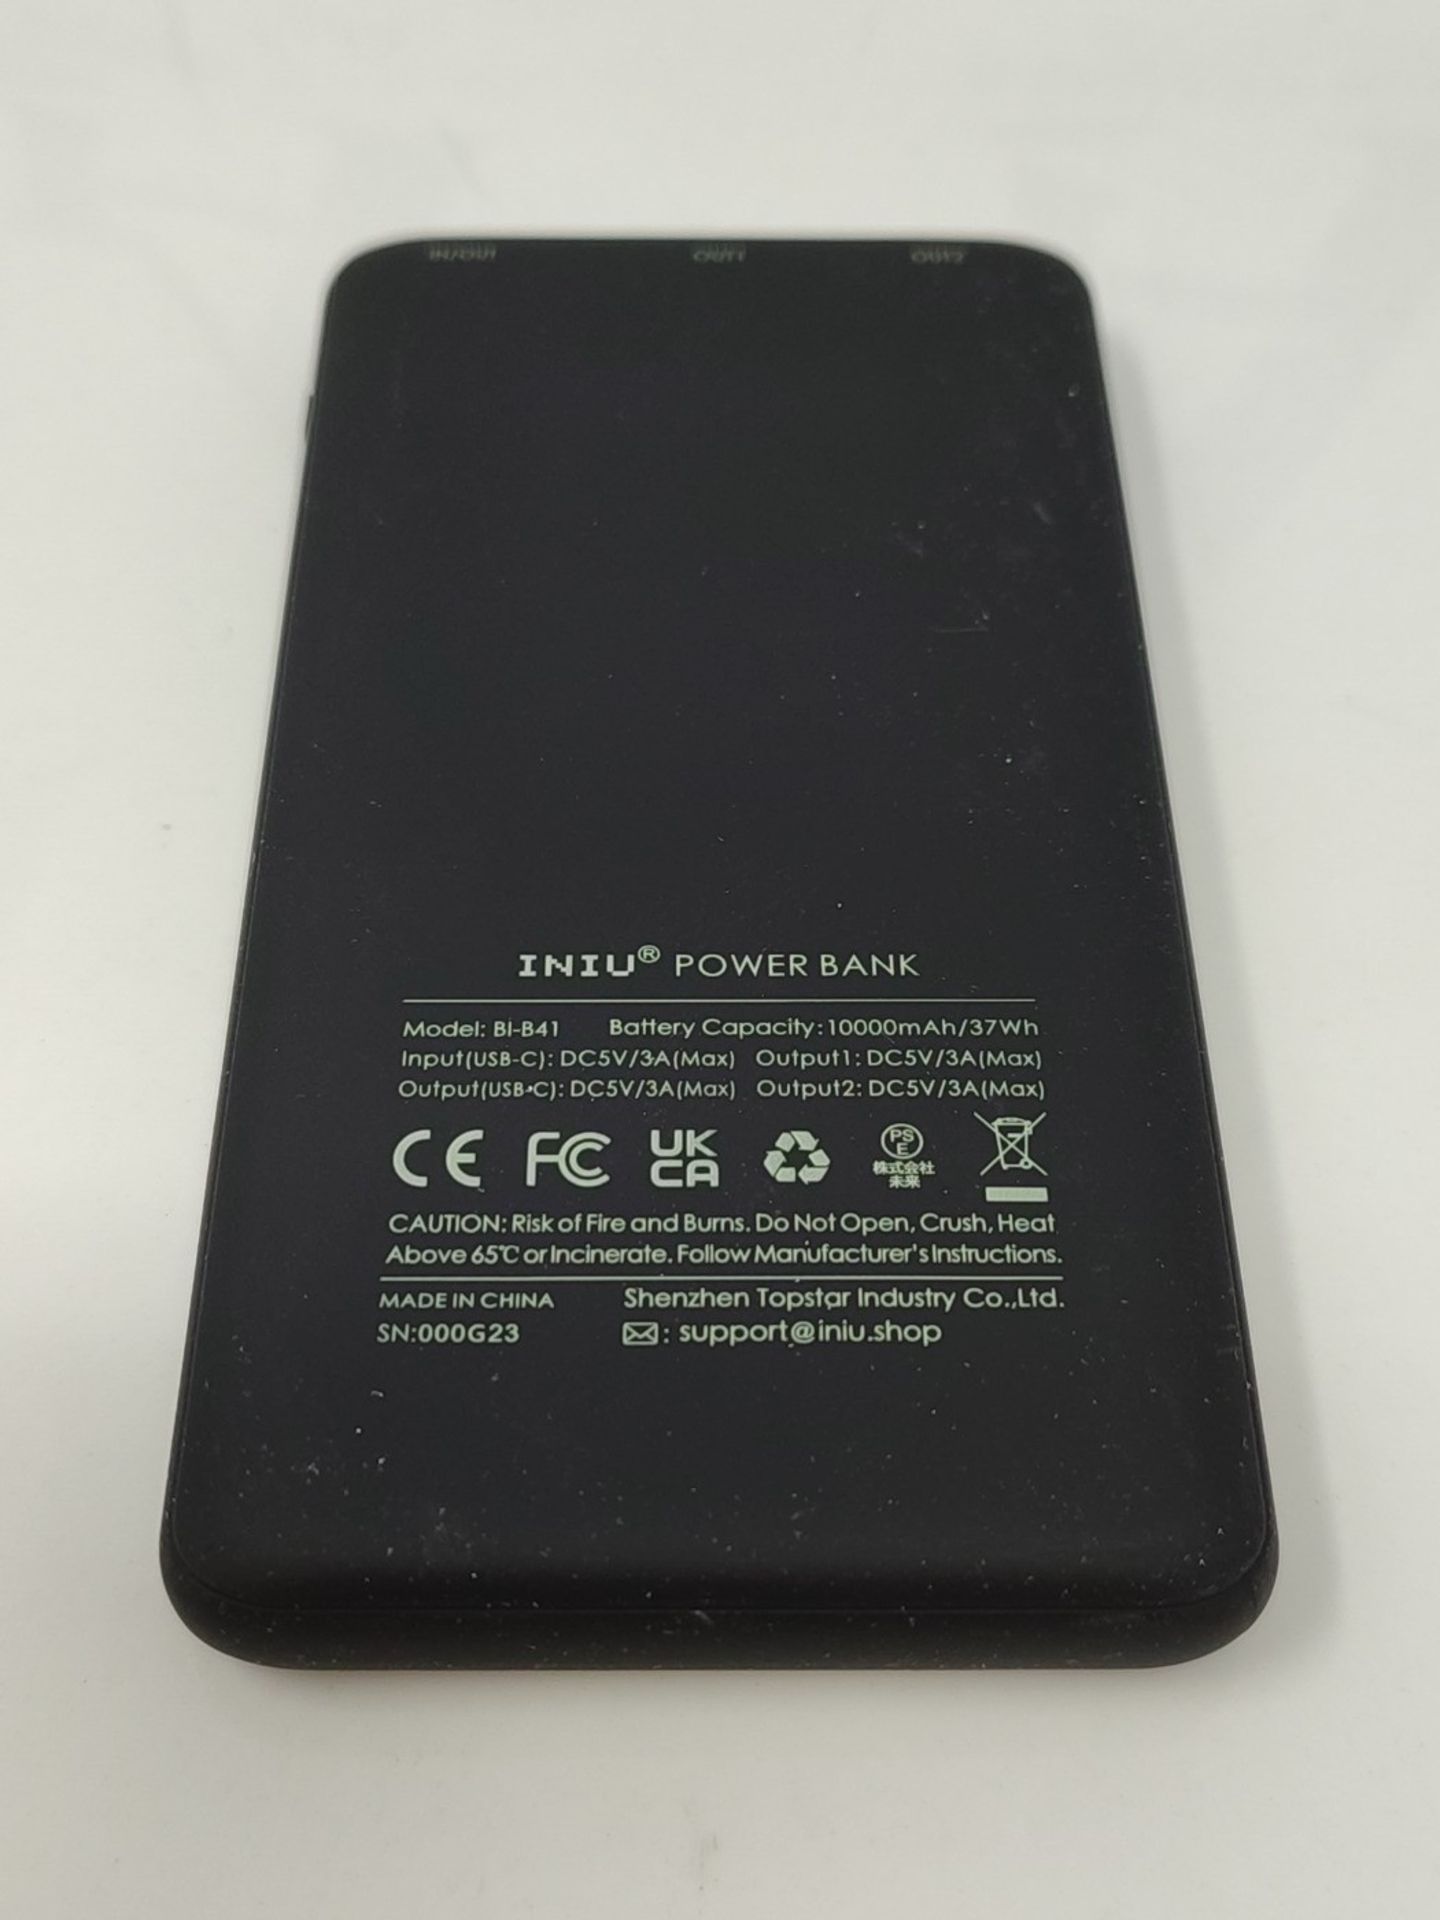 INIU Power Bank, Portable Charger 10000mAh Slimmest & Lightest High-Speed USB C Input - Image 3 of 3